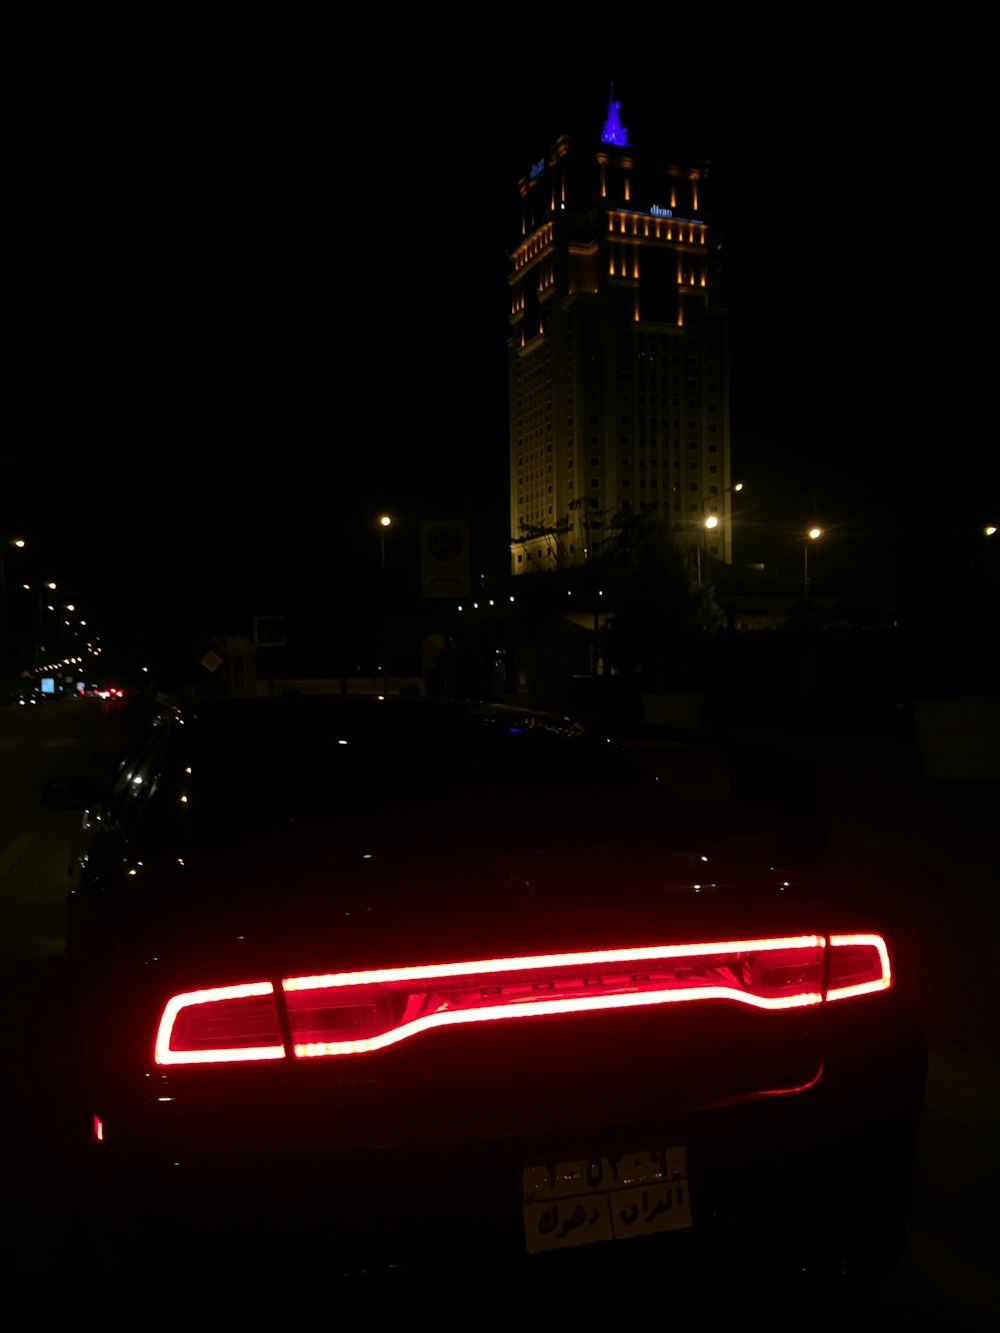 Black dodge charger with taillights on photo – Free Light Image on Unsplash